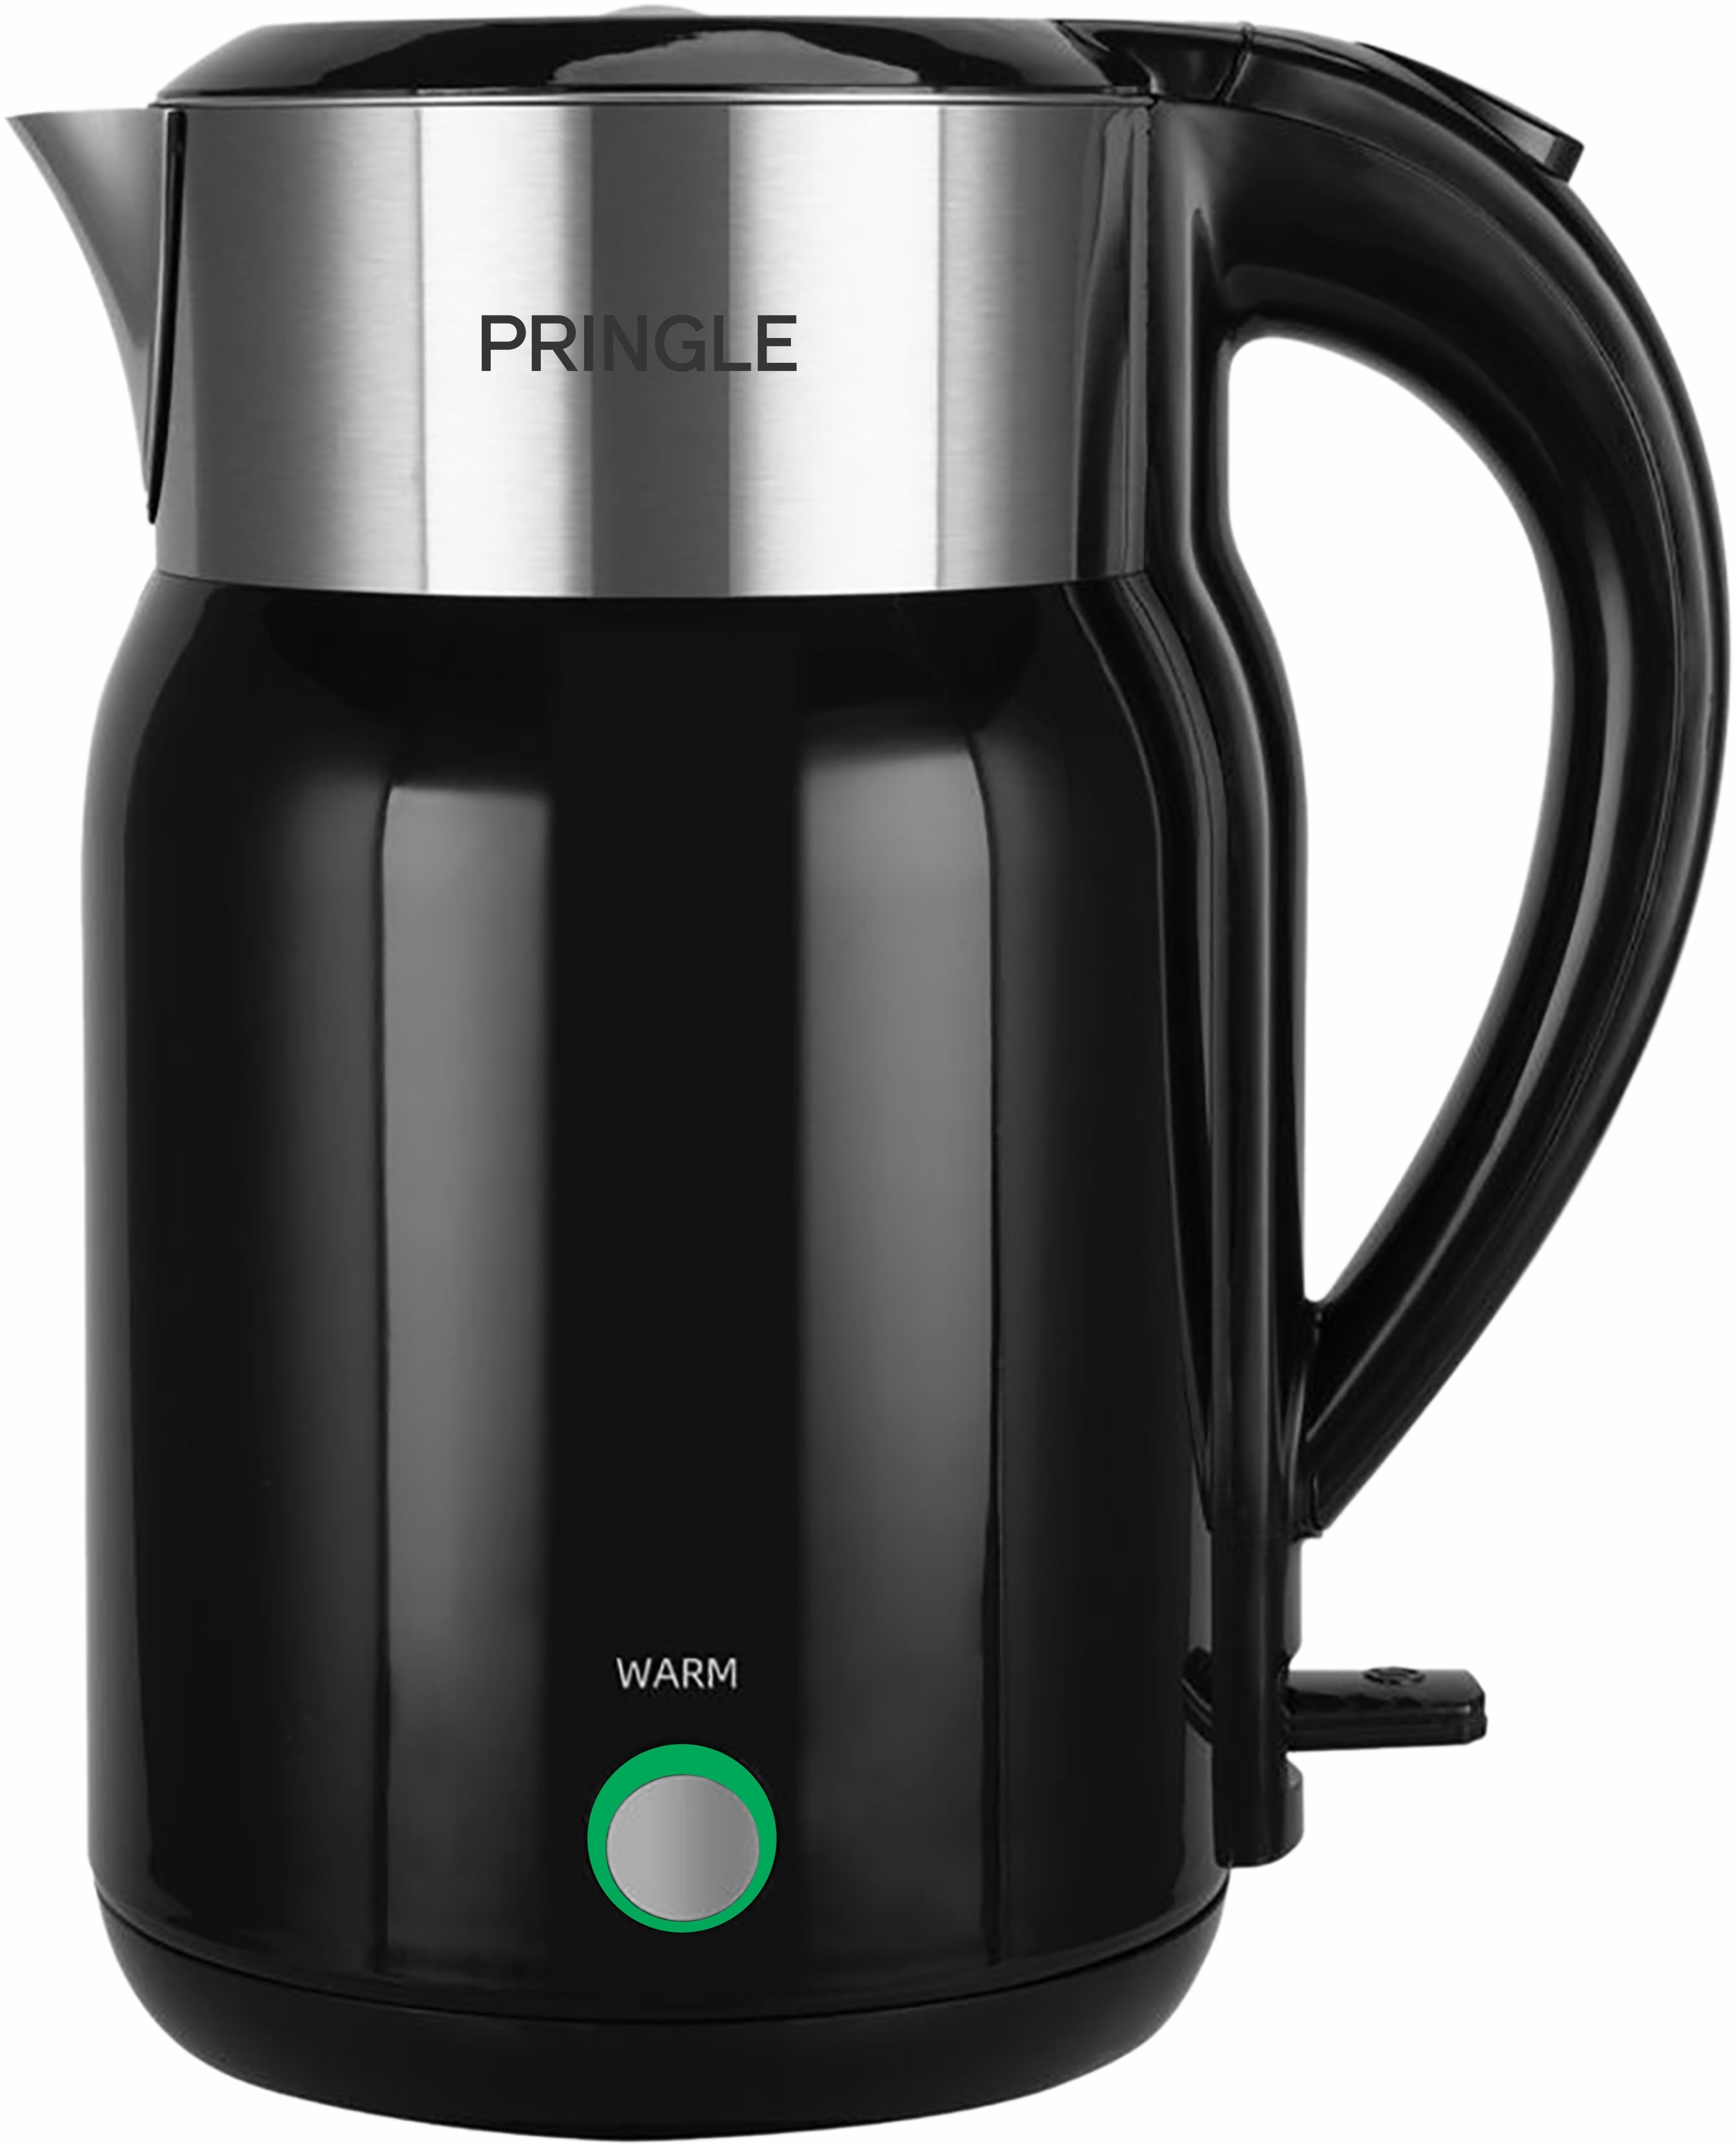 Pringle Electric Kettle Double Wall 1.8L - Haden 1500W with Boil Dry Protection & Auto-Shut Off| Inbuilt SS Filter Sieve, Concealed Heating Element| 360 Deg Cordless Base, (Black)